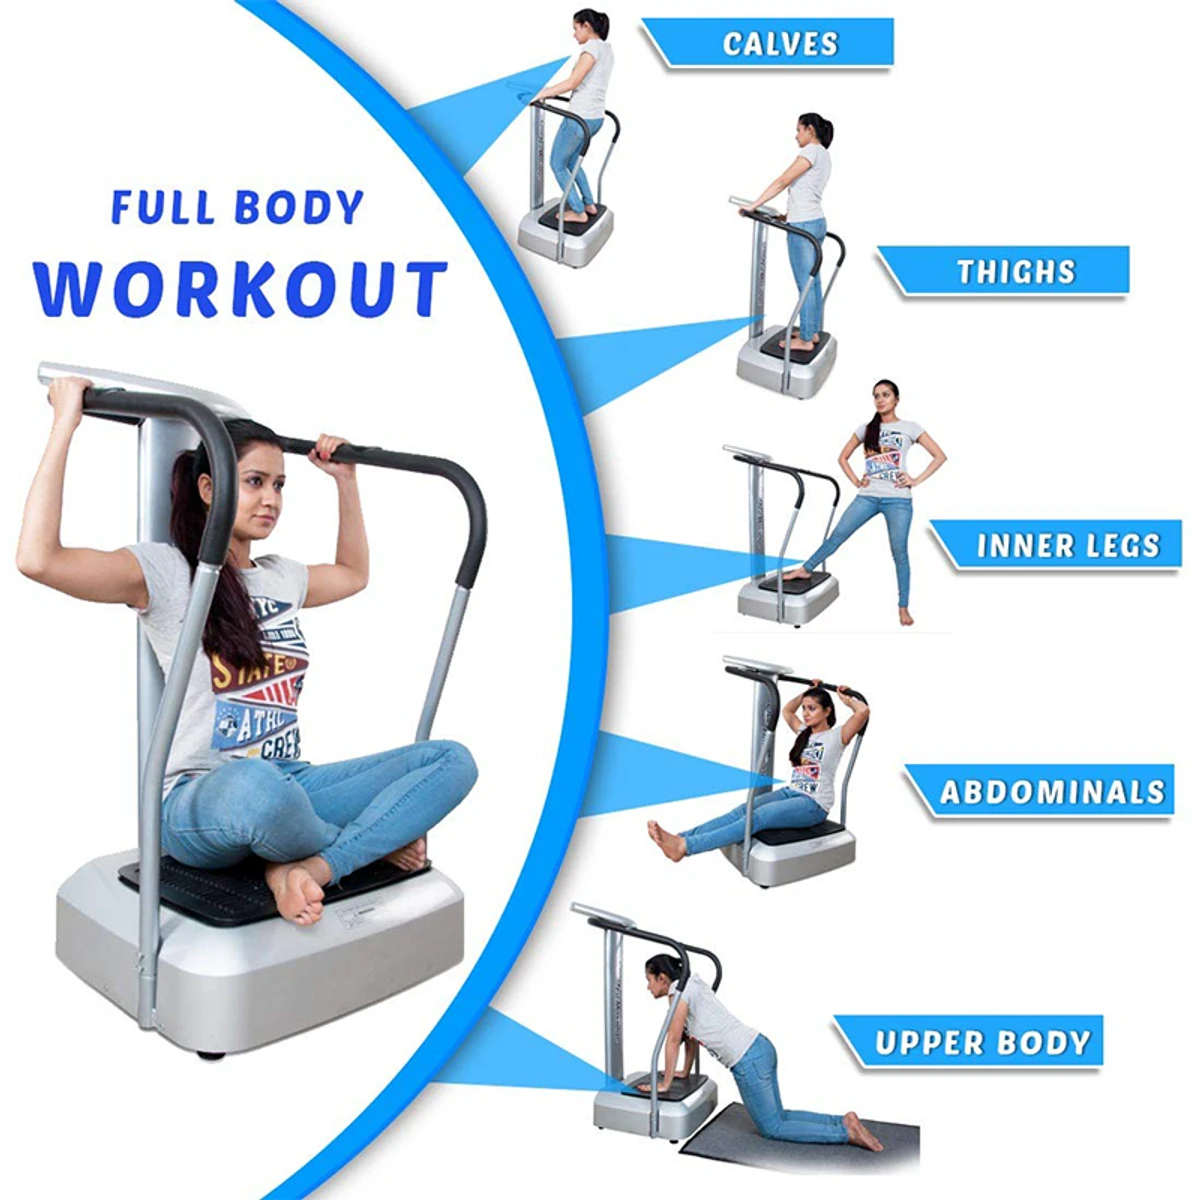 Crazy Fit Oscillation Massager Machine for Full Body Exercise Fitness Workout Vibration Plate (Fitness)